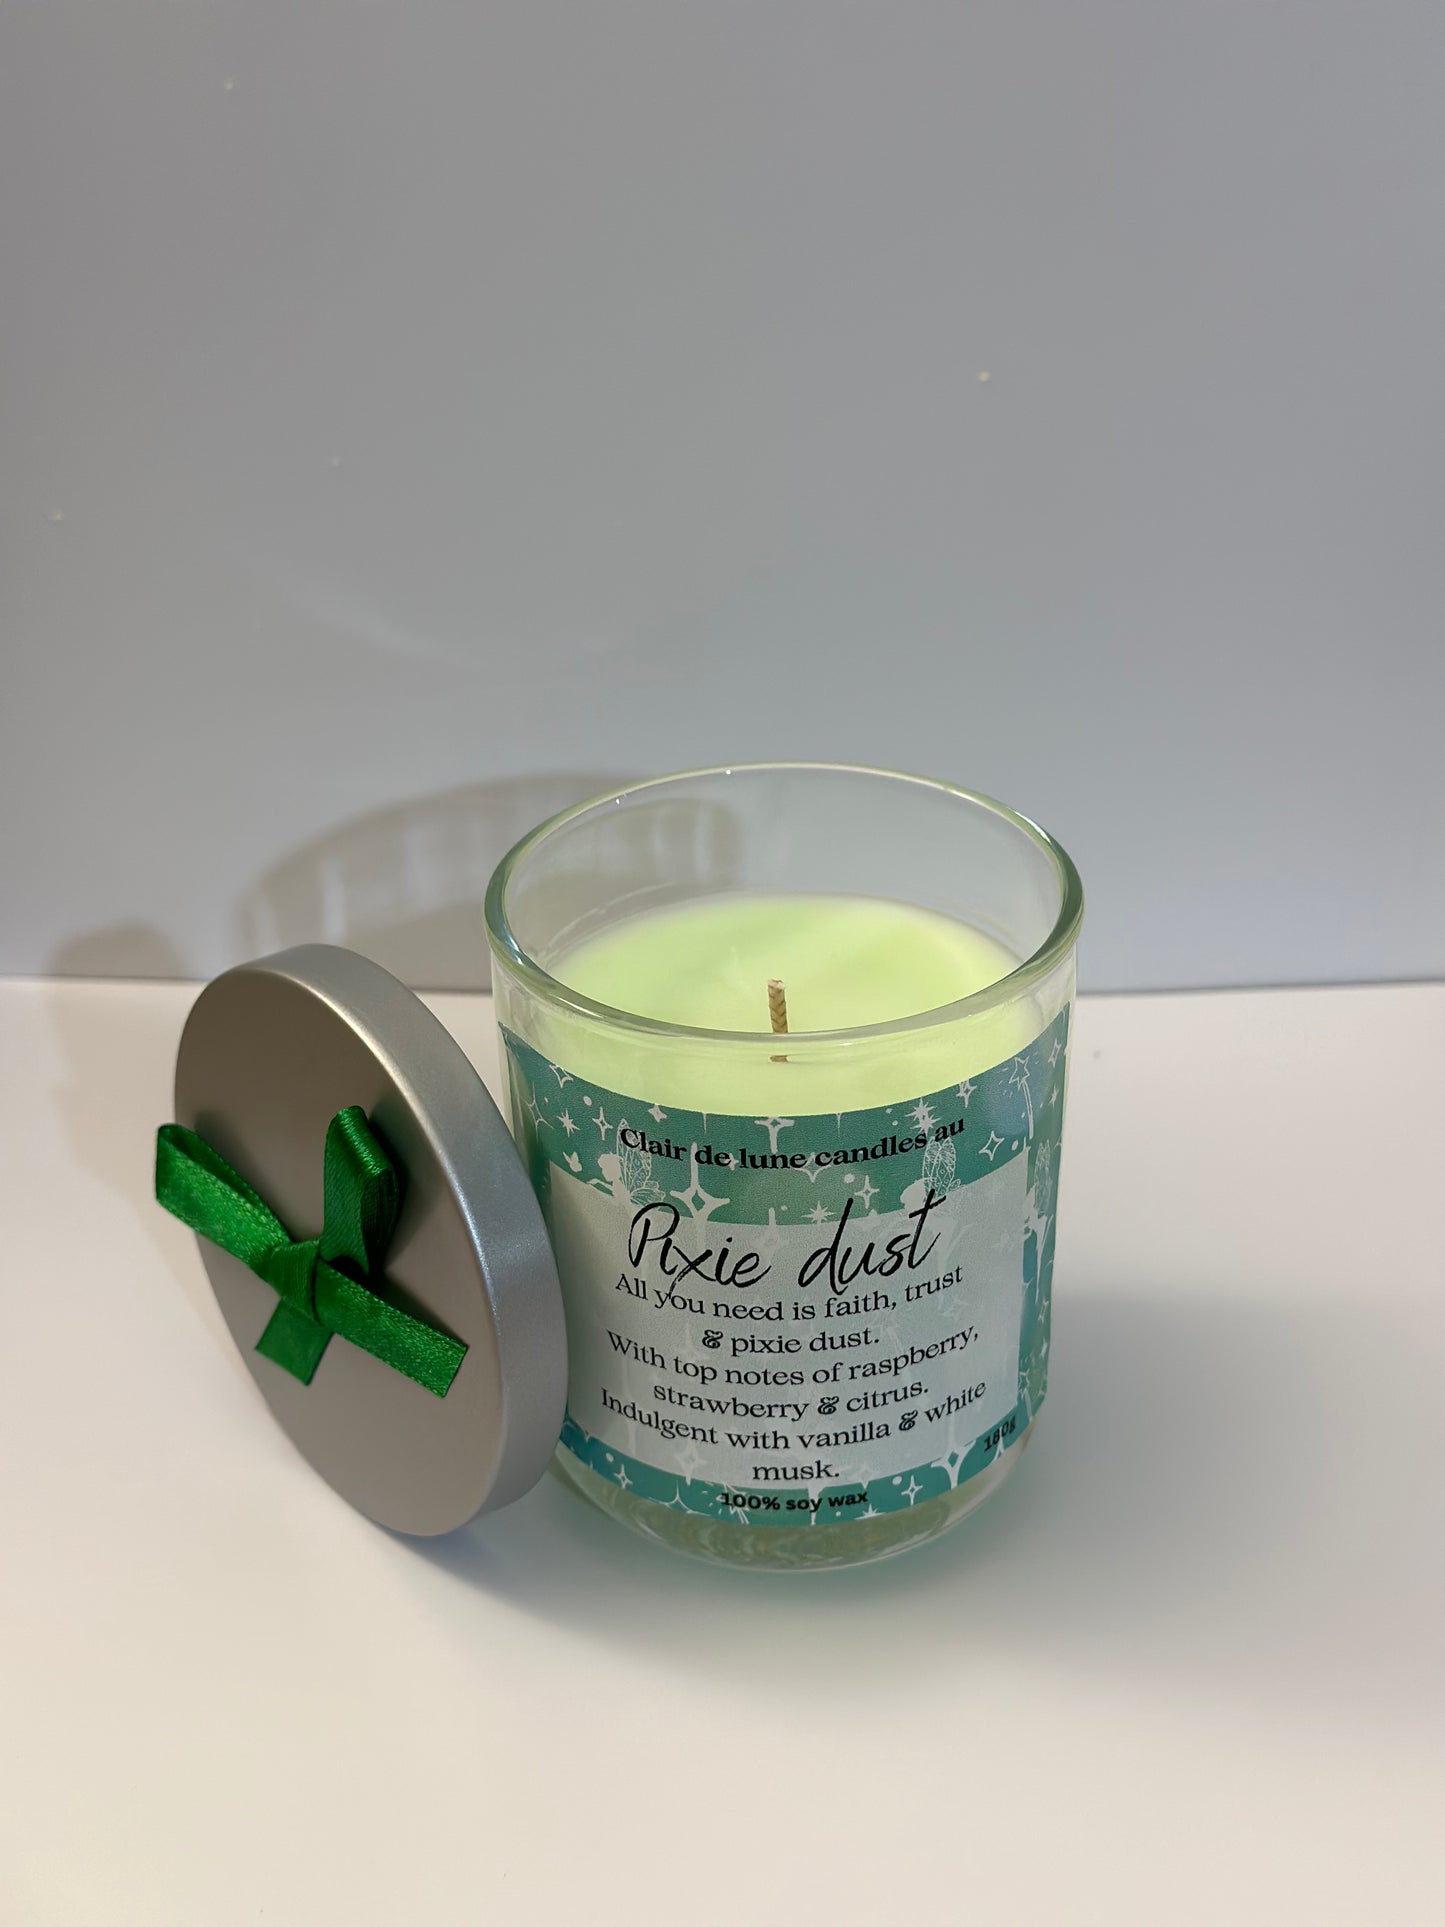 Pixie dust candle